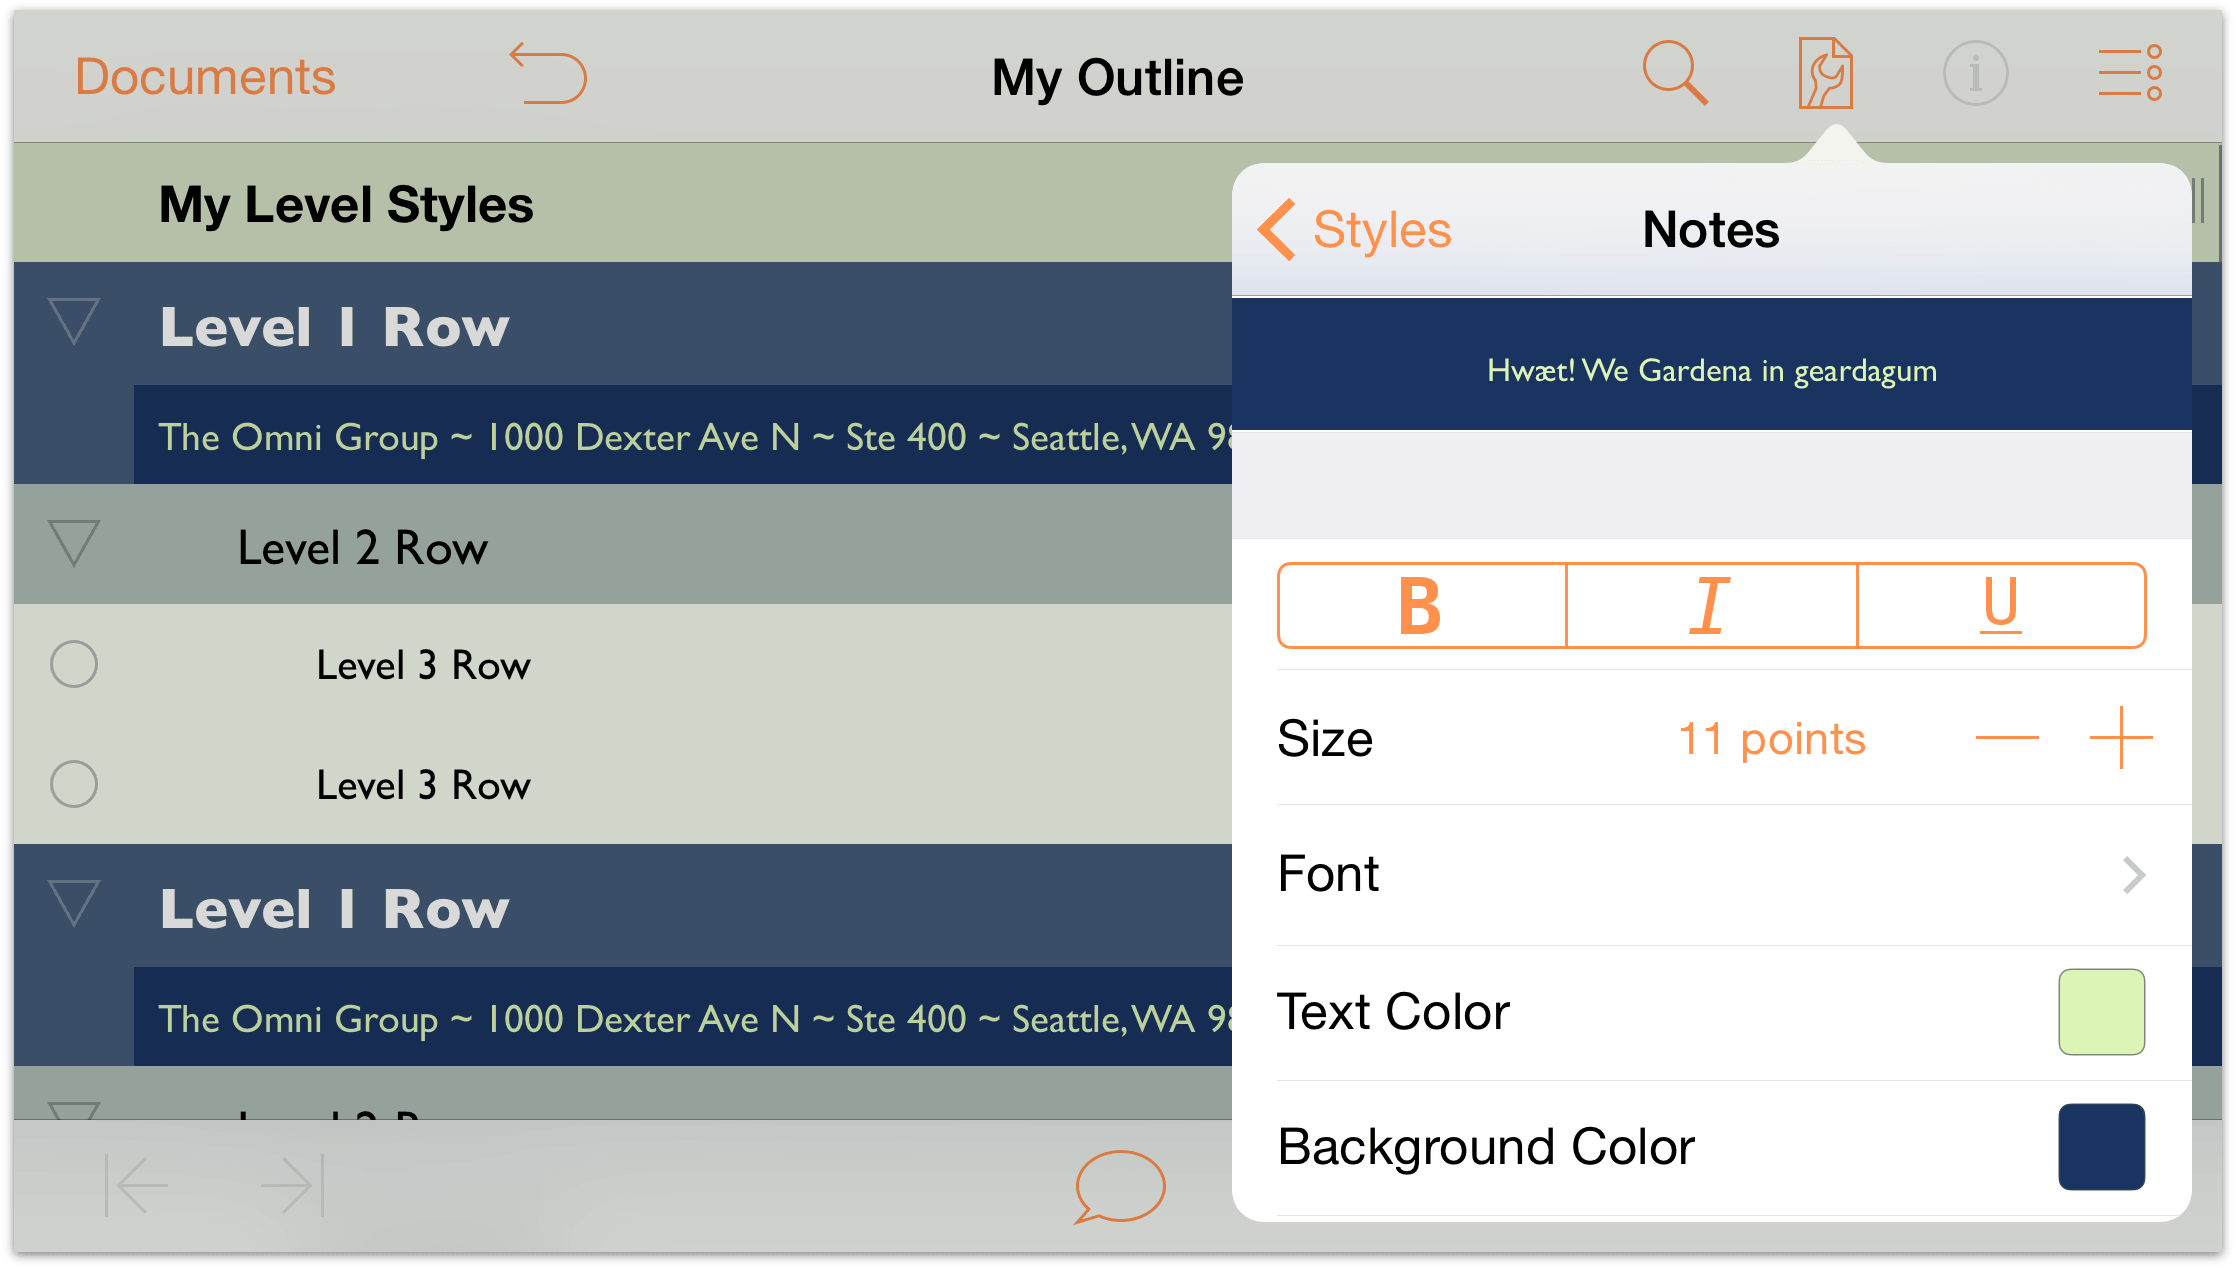 The Notes style pane